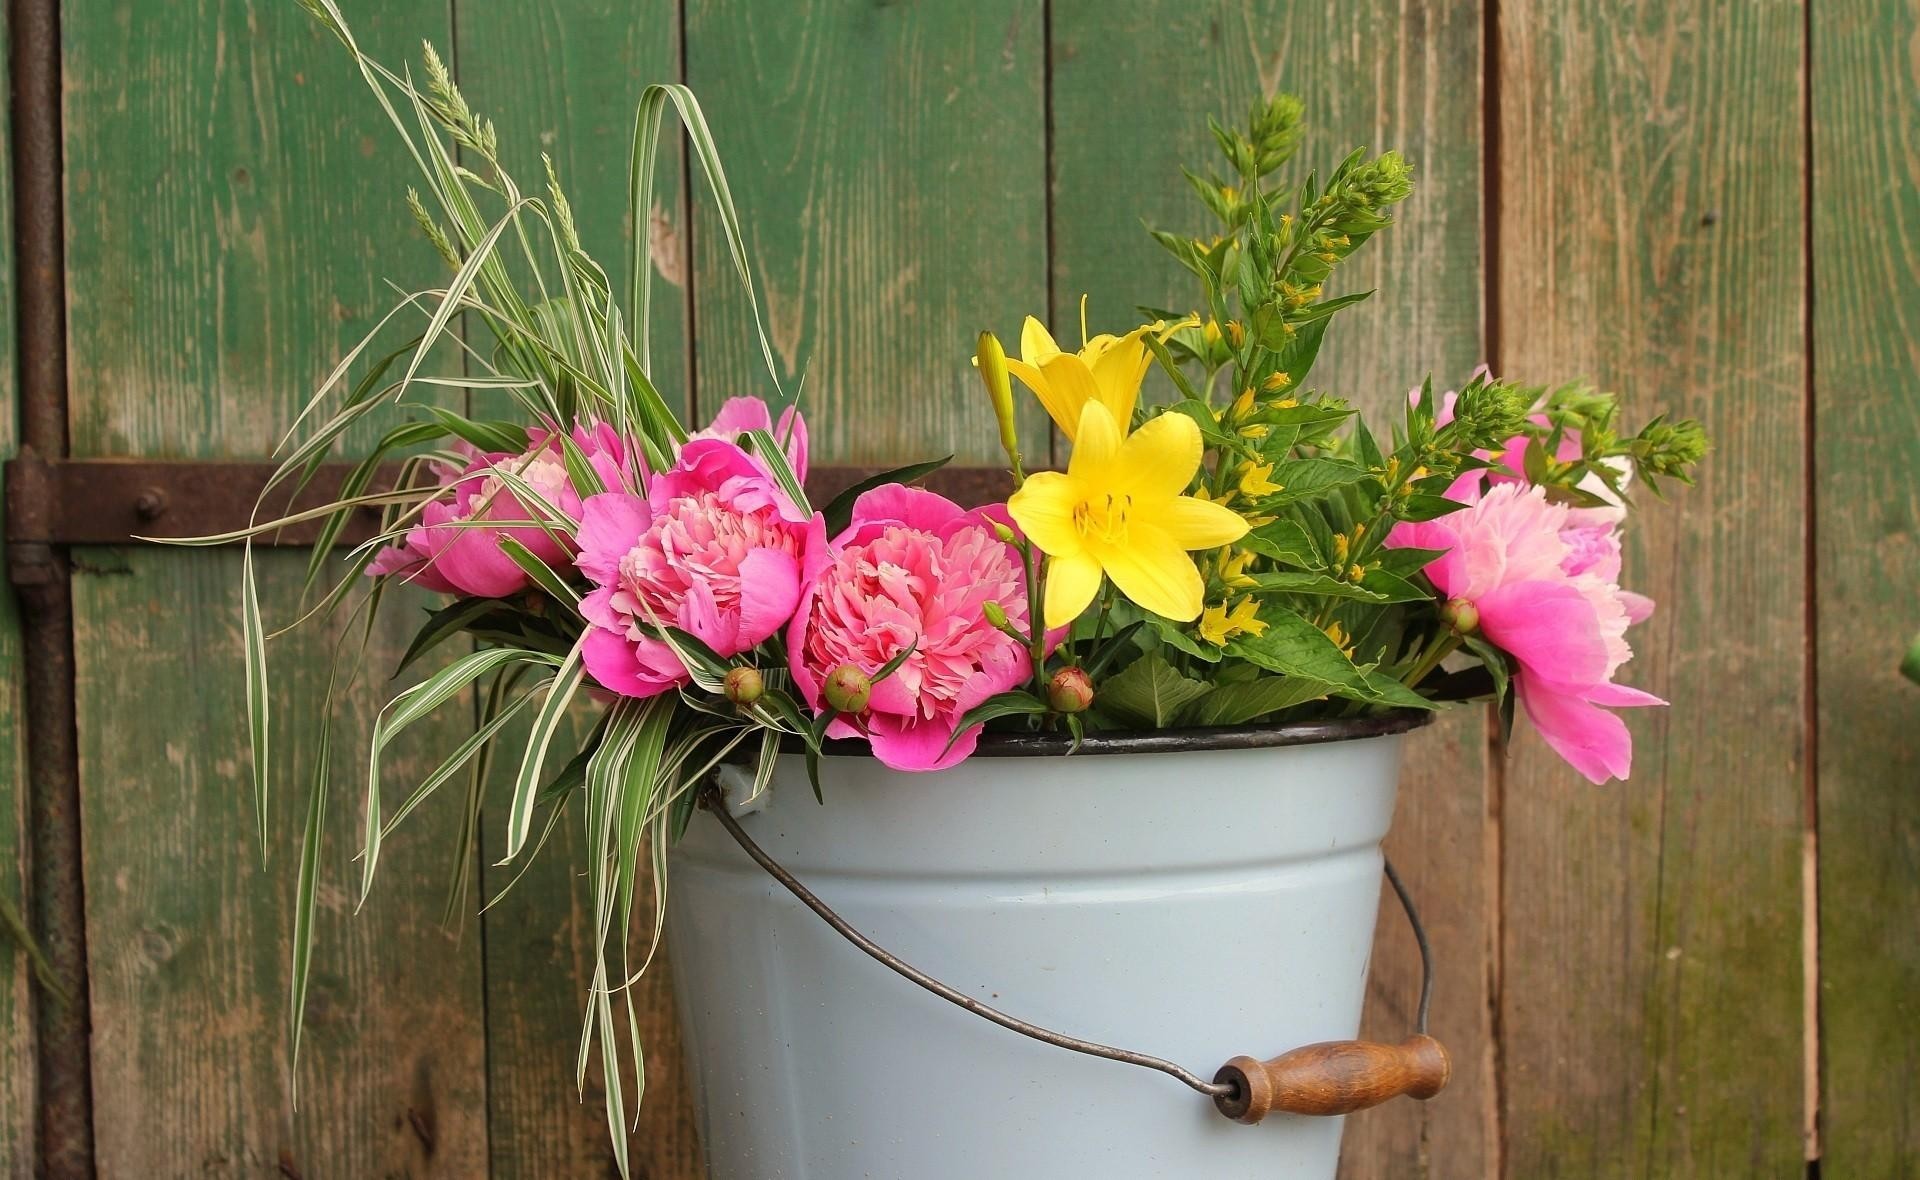 1920x1180 Wallpaper Peonies, Lilies, Flowers, Bucket, Greens, Fence HD, Picture, Image